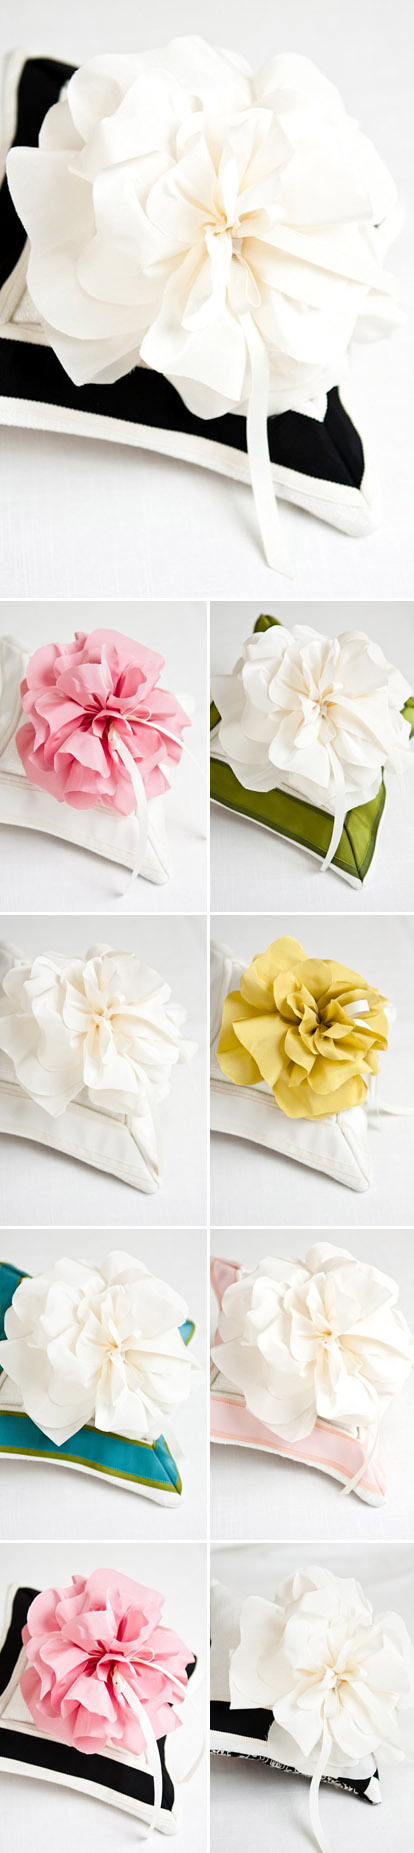 Pretty over sized fabric flower wedding ring bearer pillows from Maihar Design